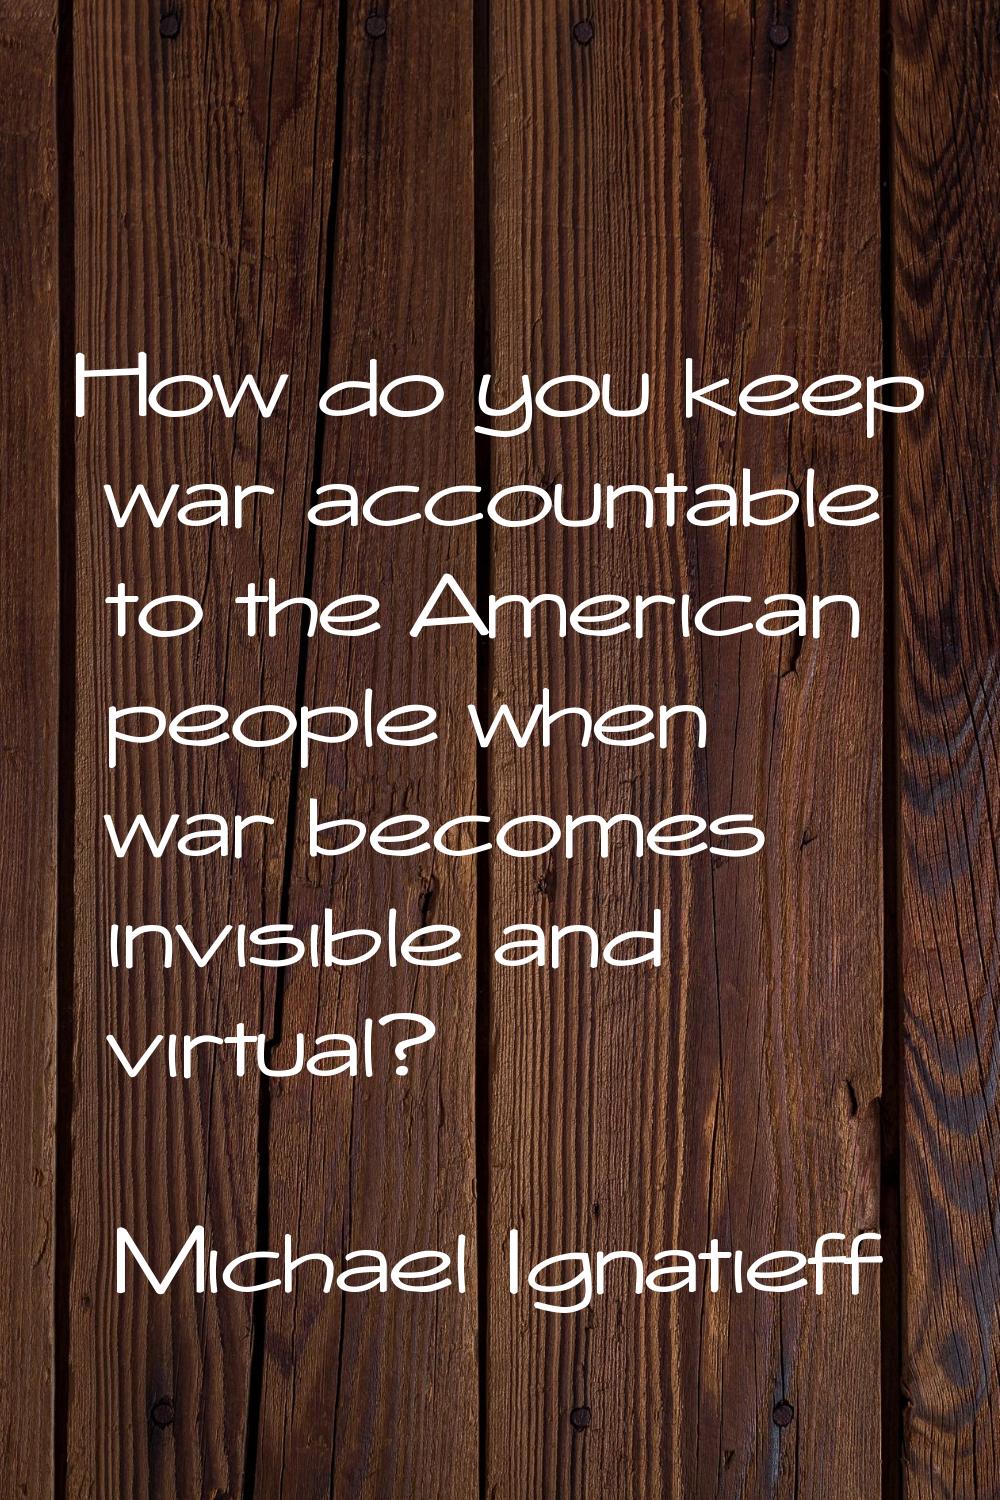 How do you keep war accountable to the American people when war becomes invisible and virtual?